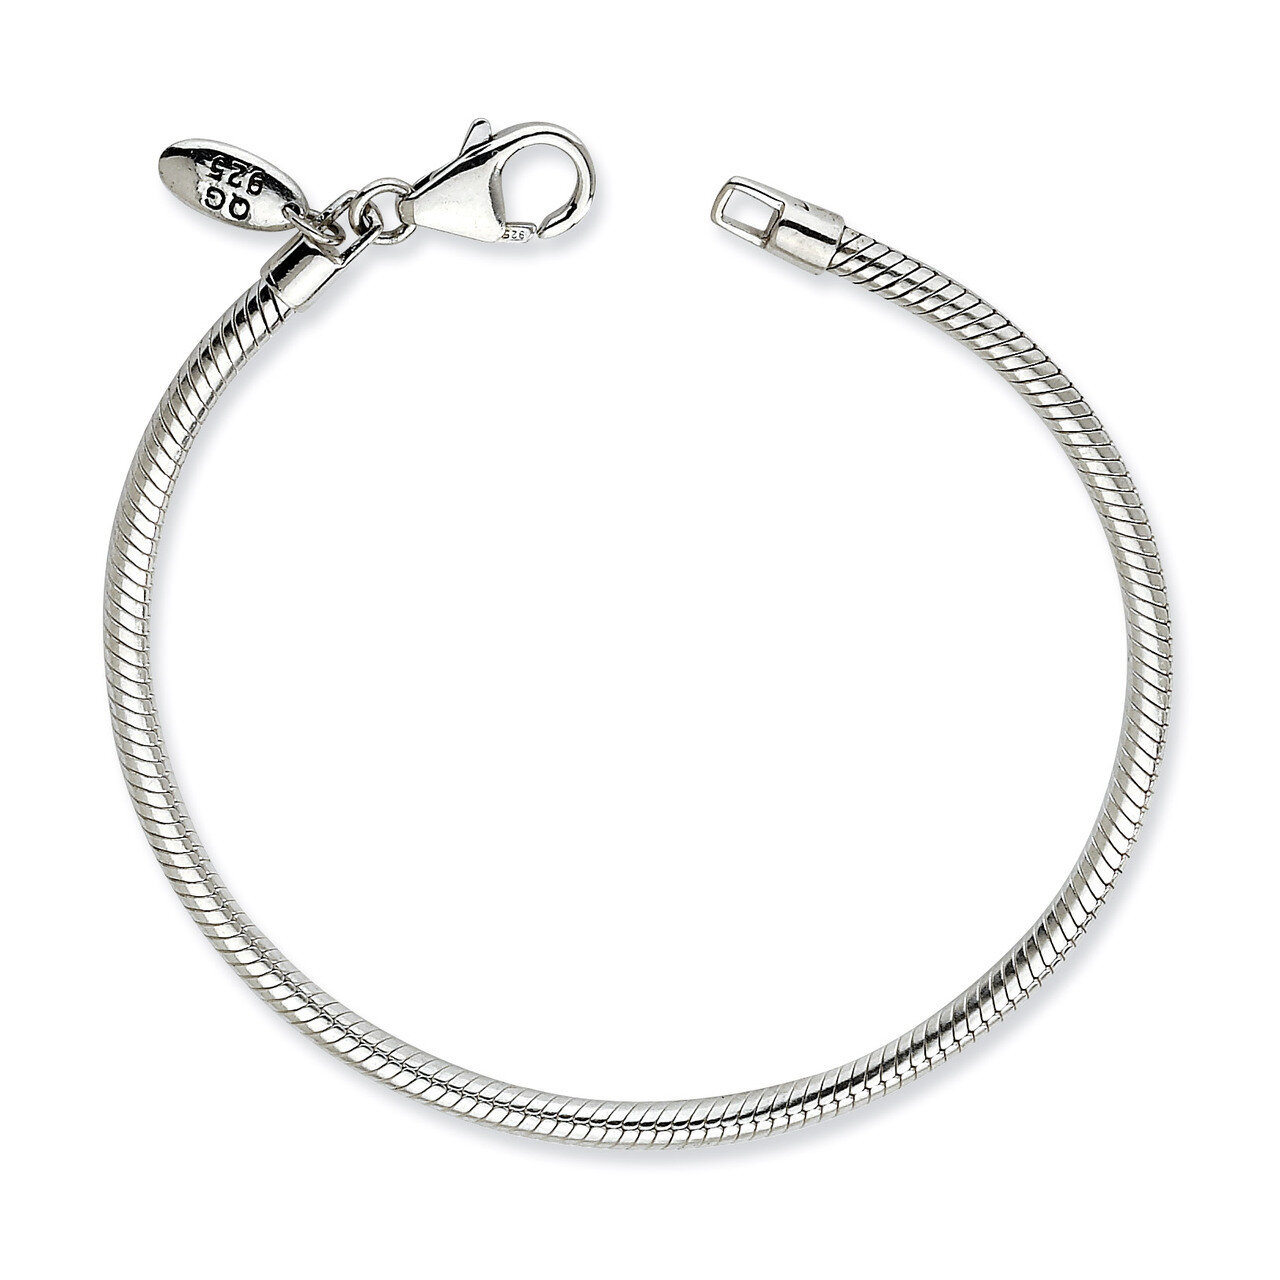 7.25 Inch Lobster Clasp Bead Bracelet - Sterling Silver QRS984-7.25